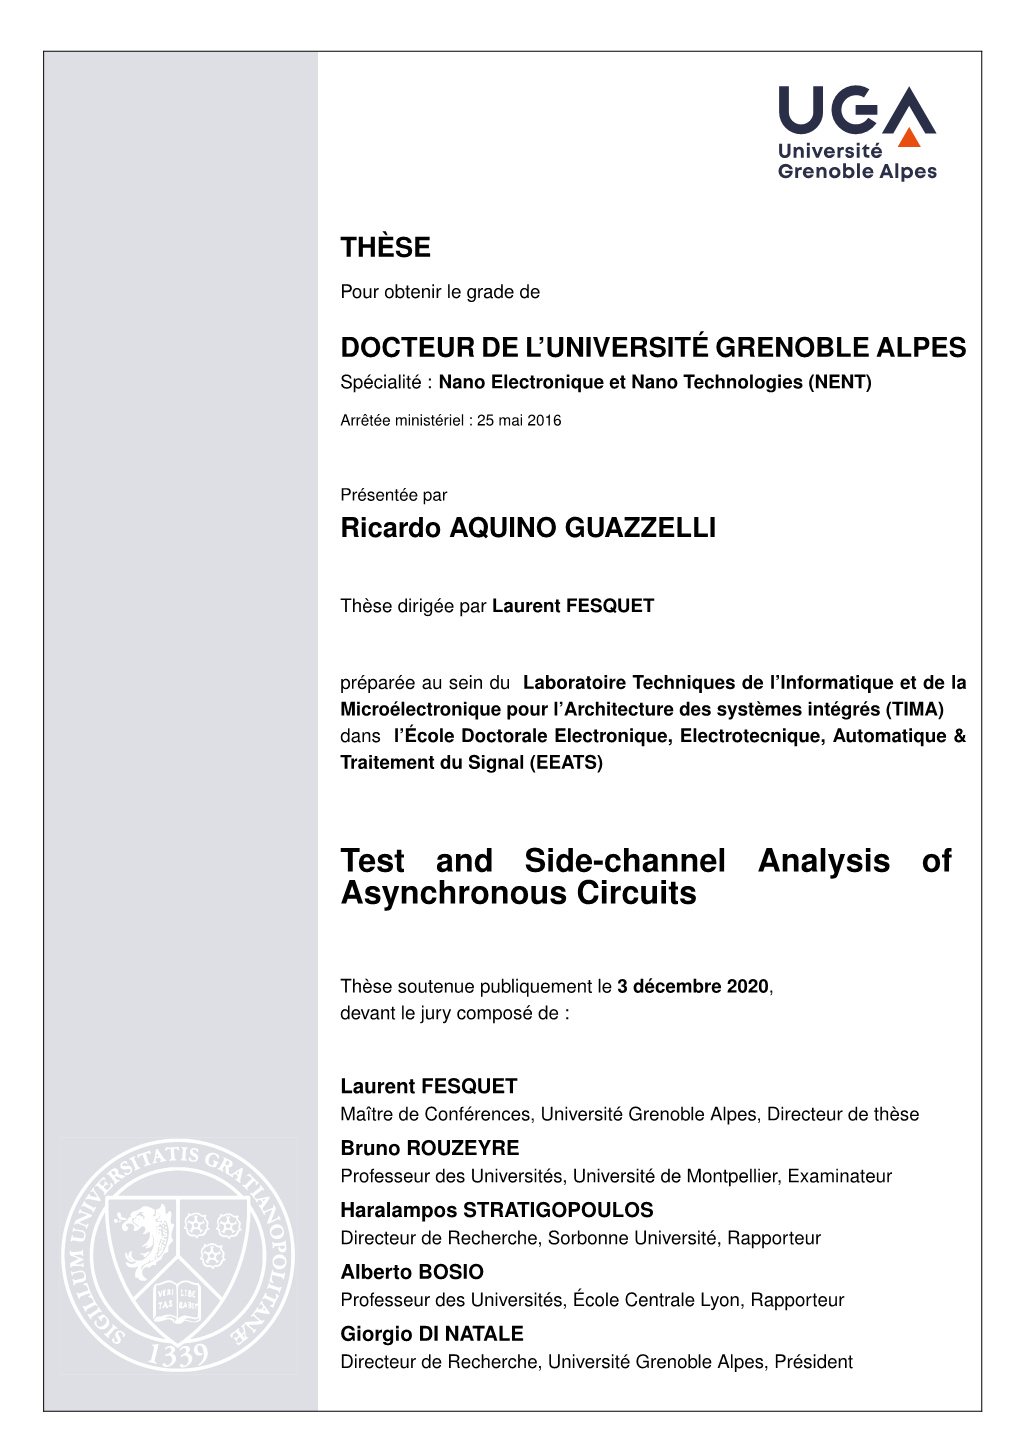 Test and Side-Channel Analysis of Asynchronous Circuits